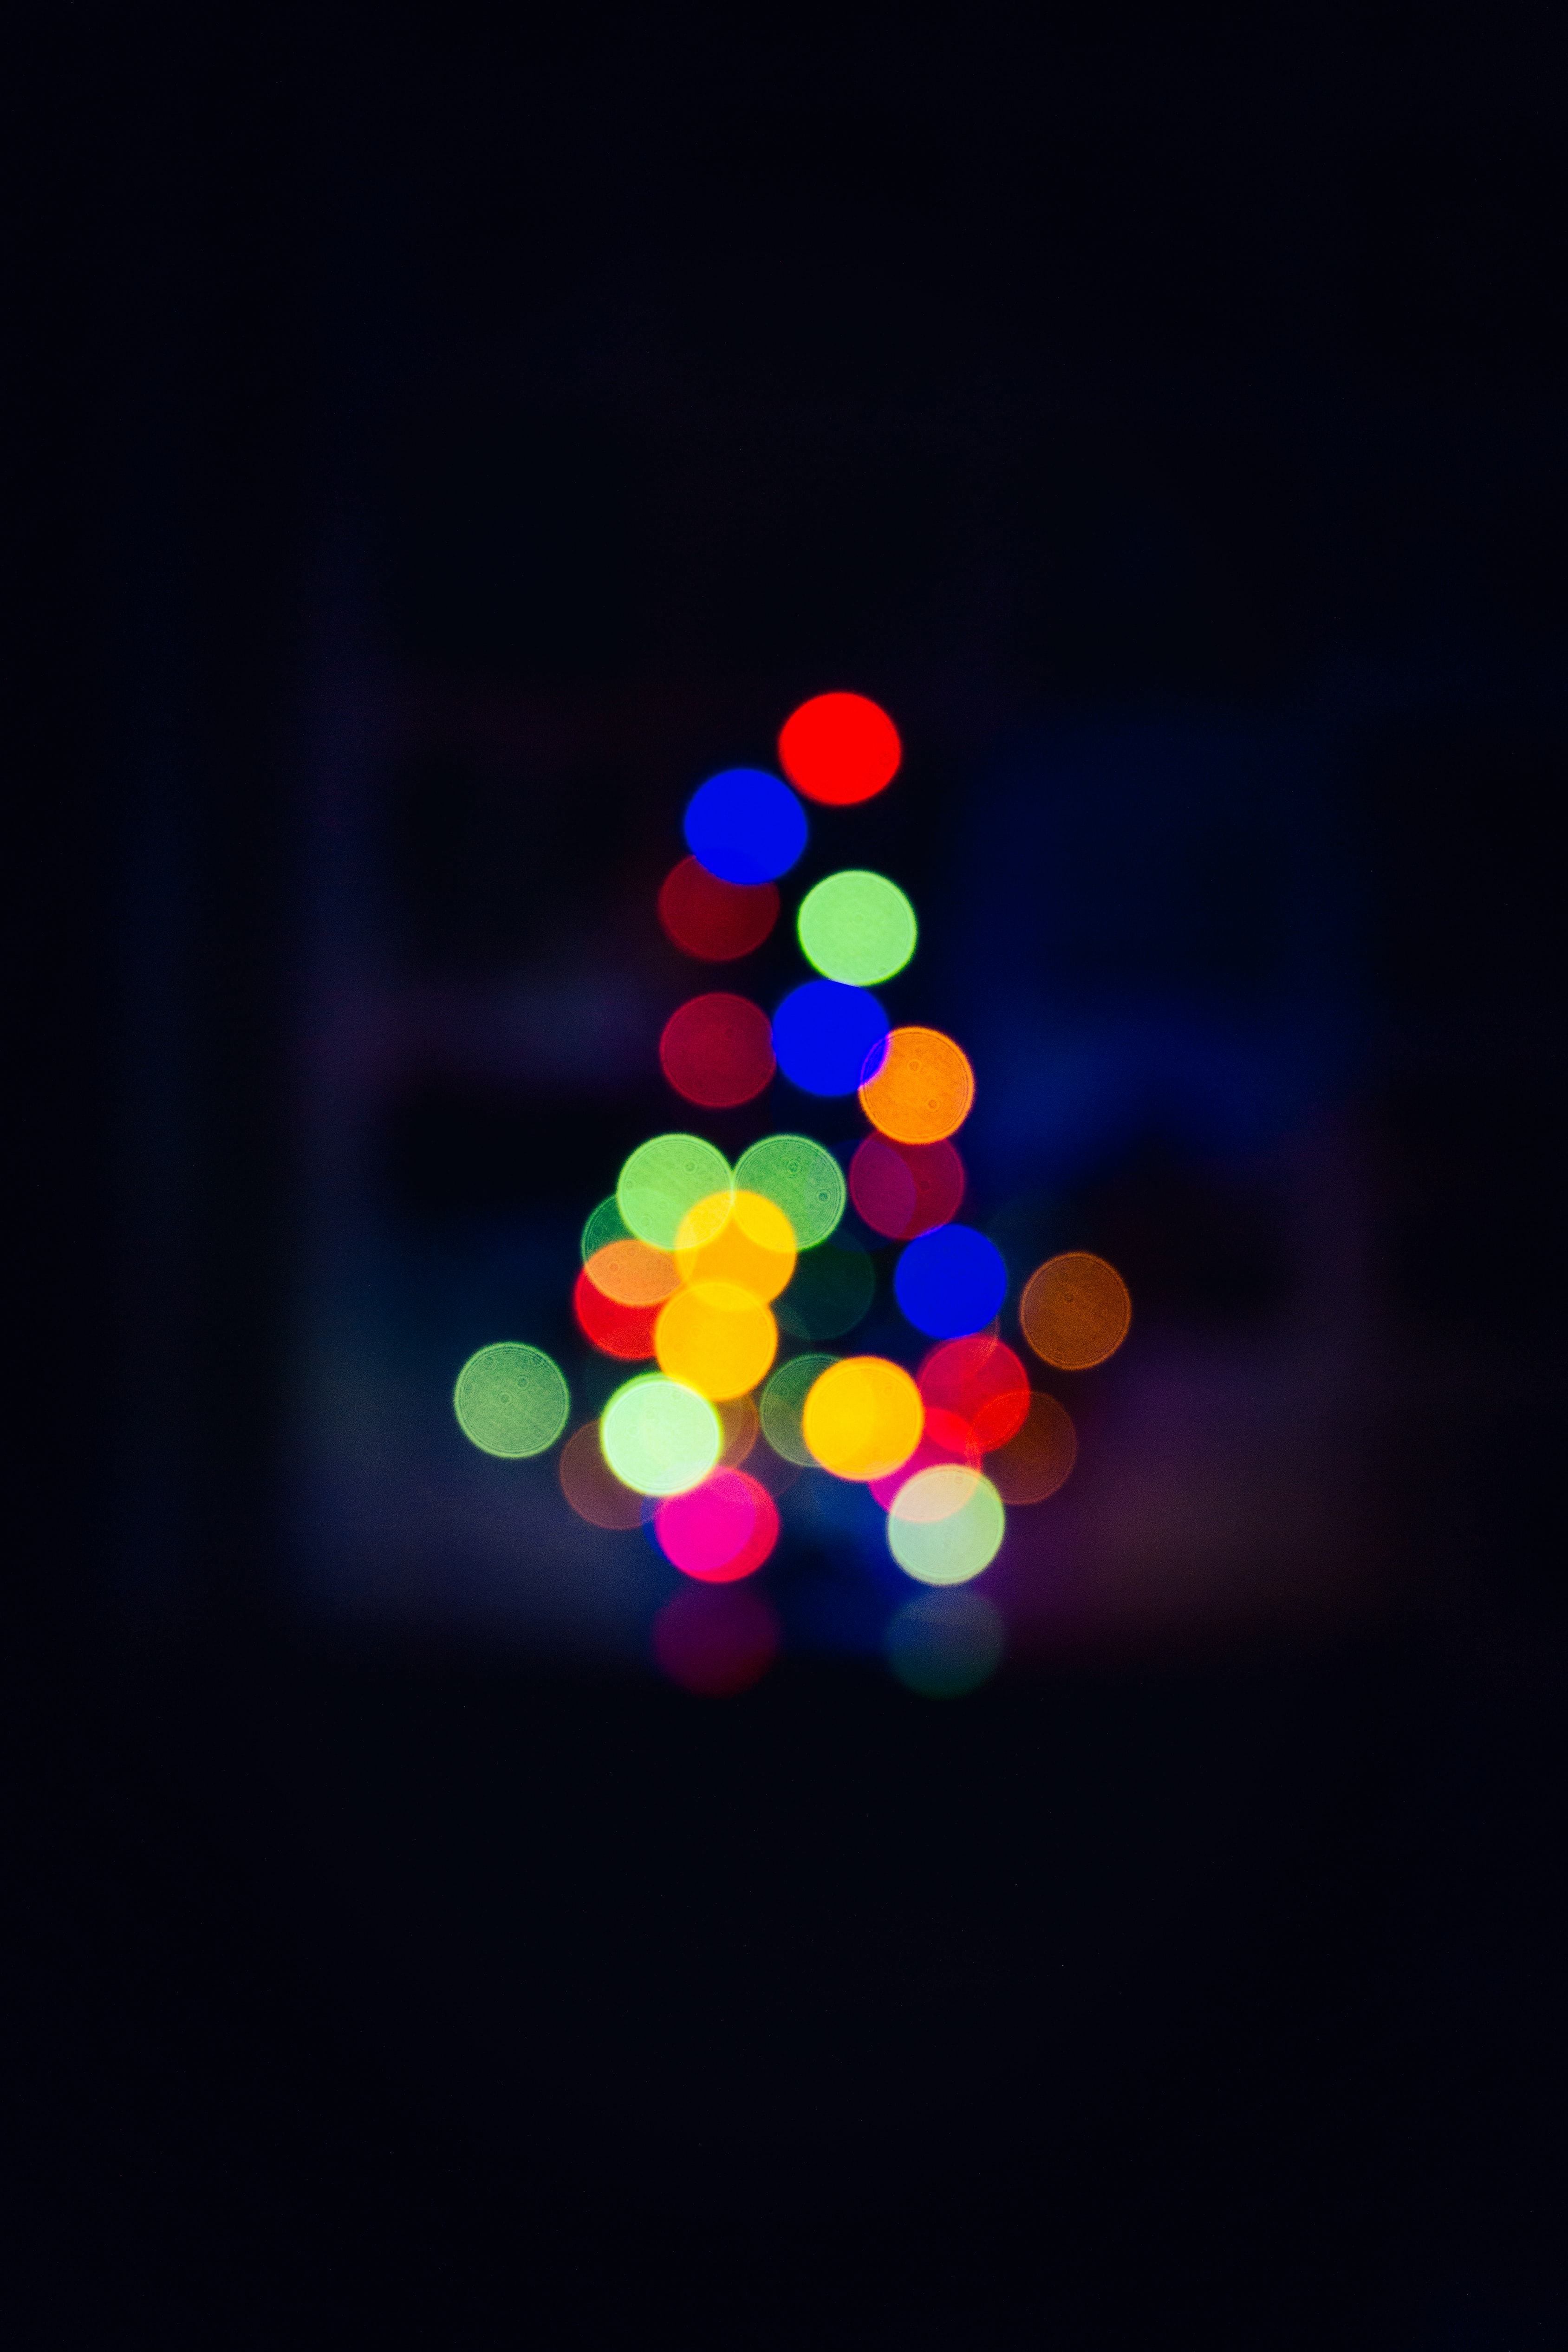 circles, blur, abstract, glare, multicolored, motley, smooth, boquet, bokeh High Definition image